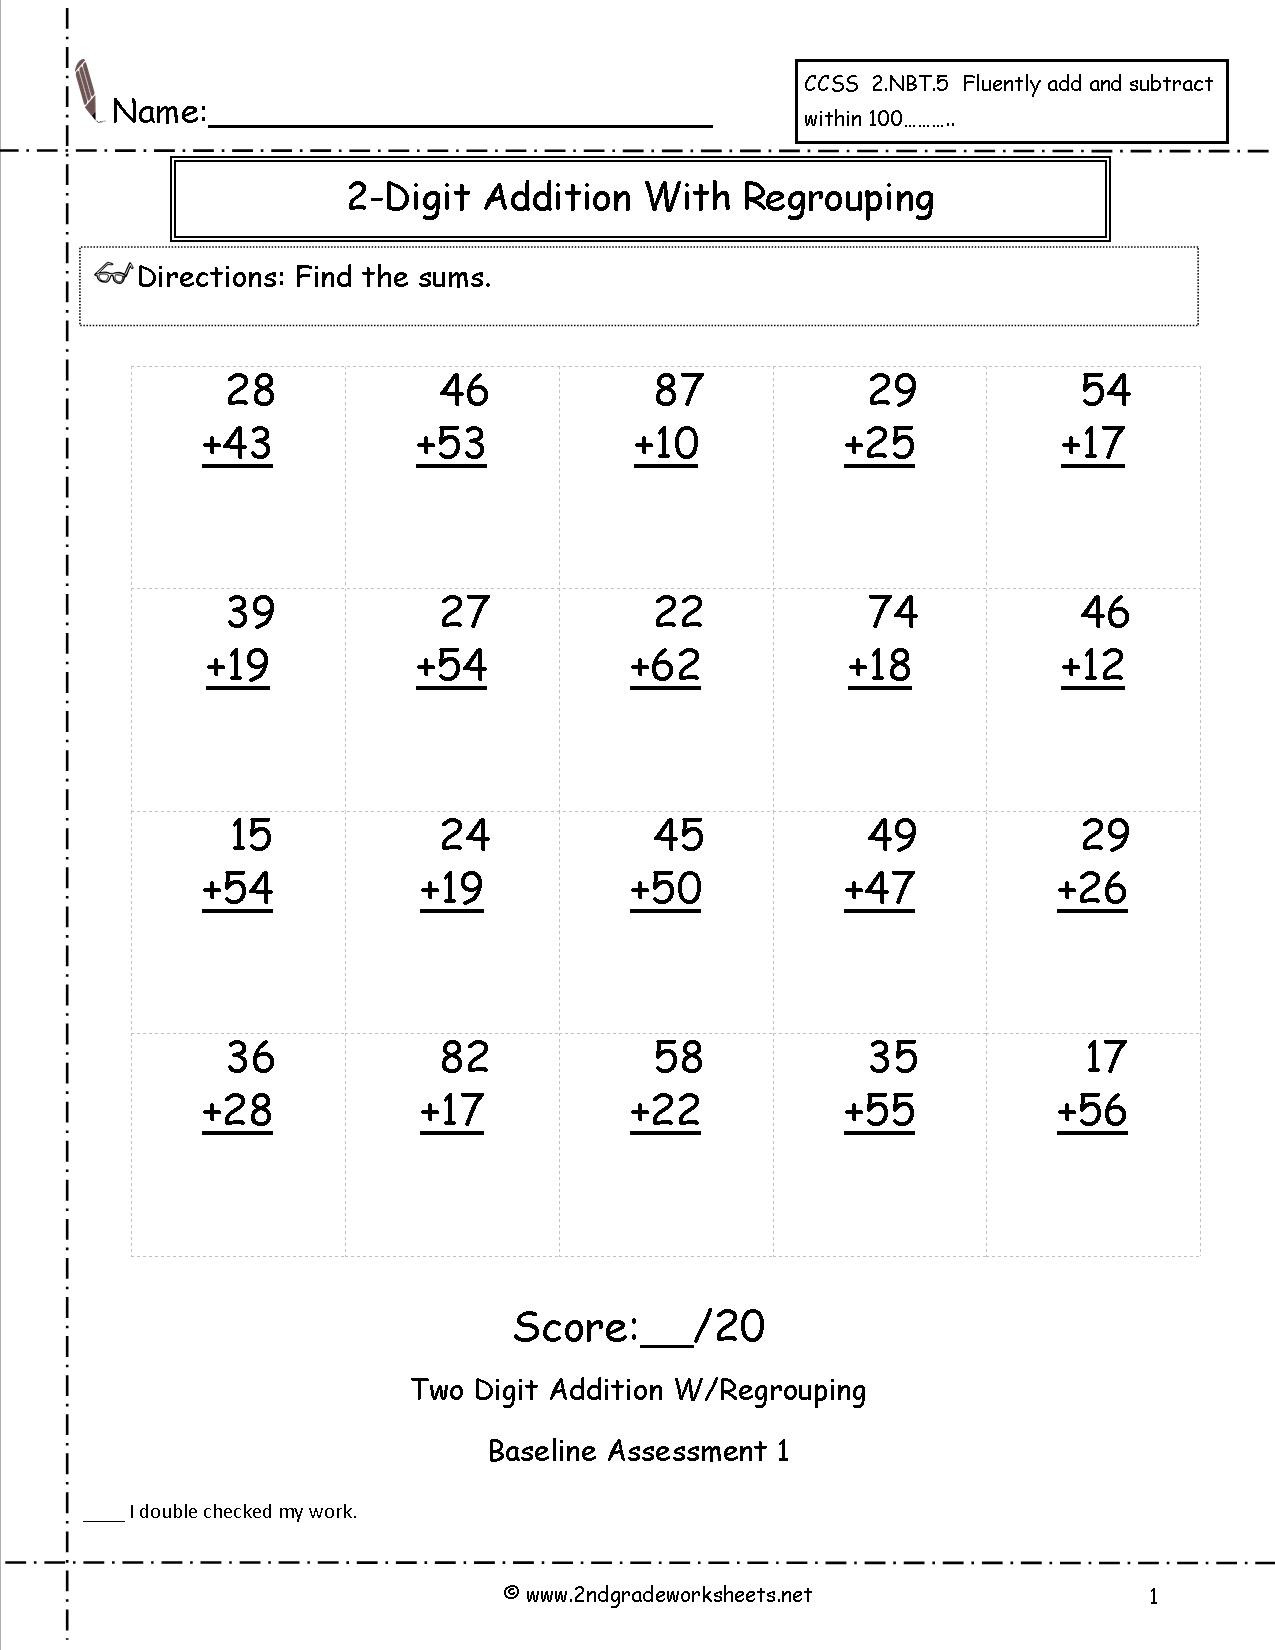 Free Math Worksheets Second Grade 2 Addition Add 2 Digit Plus 1 Digit Missing Addend No Regrouping